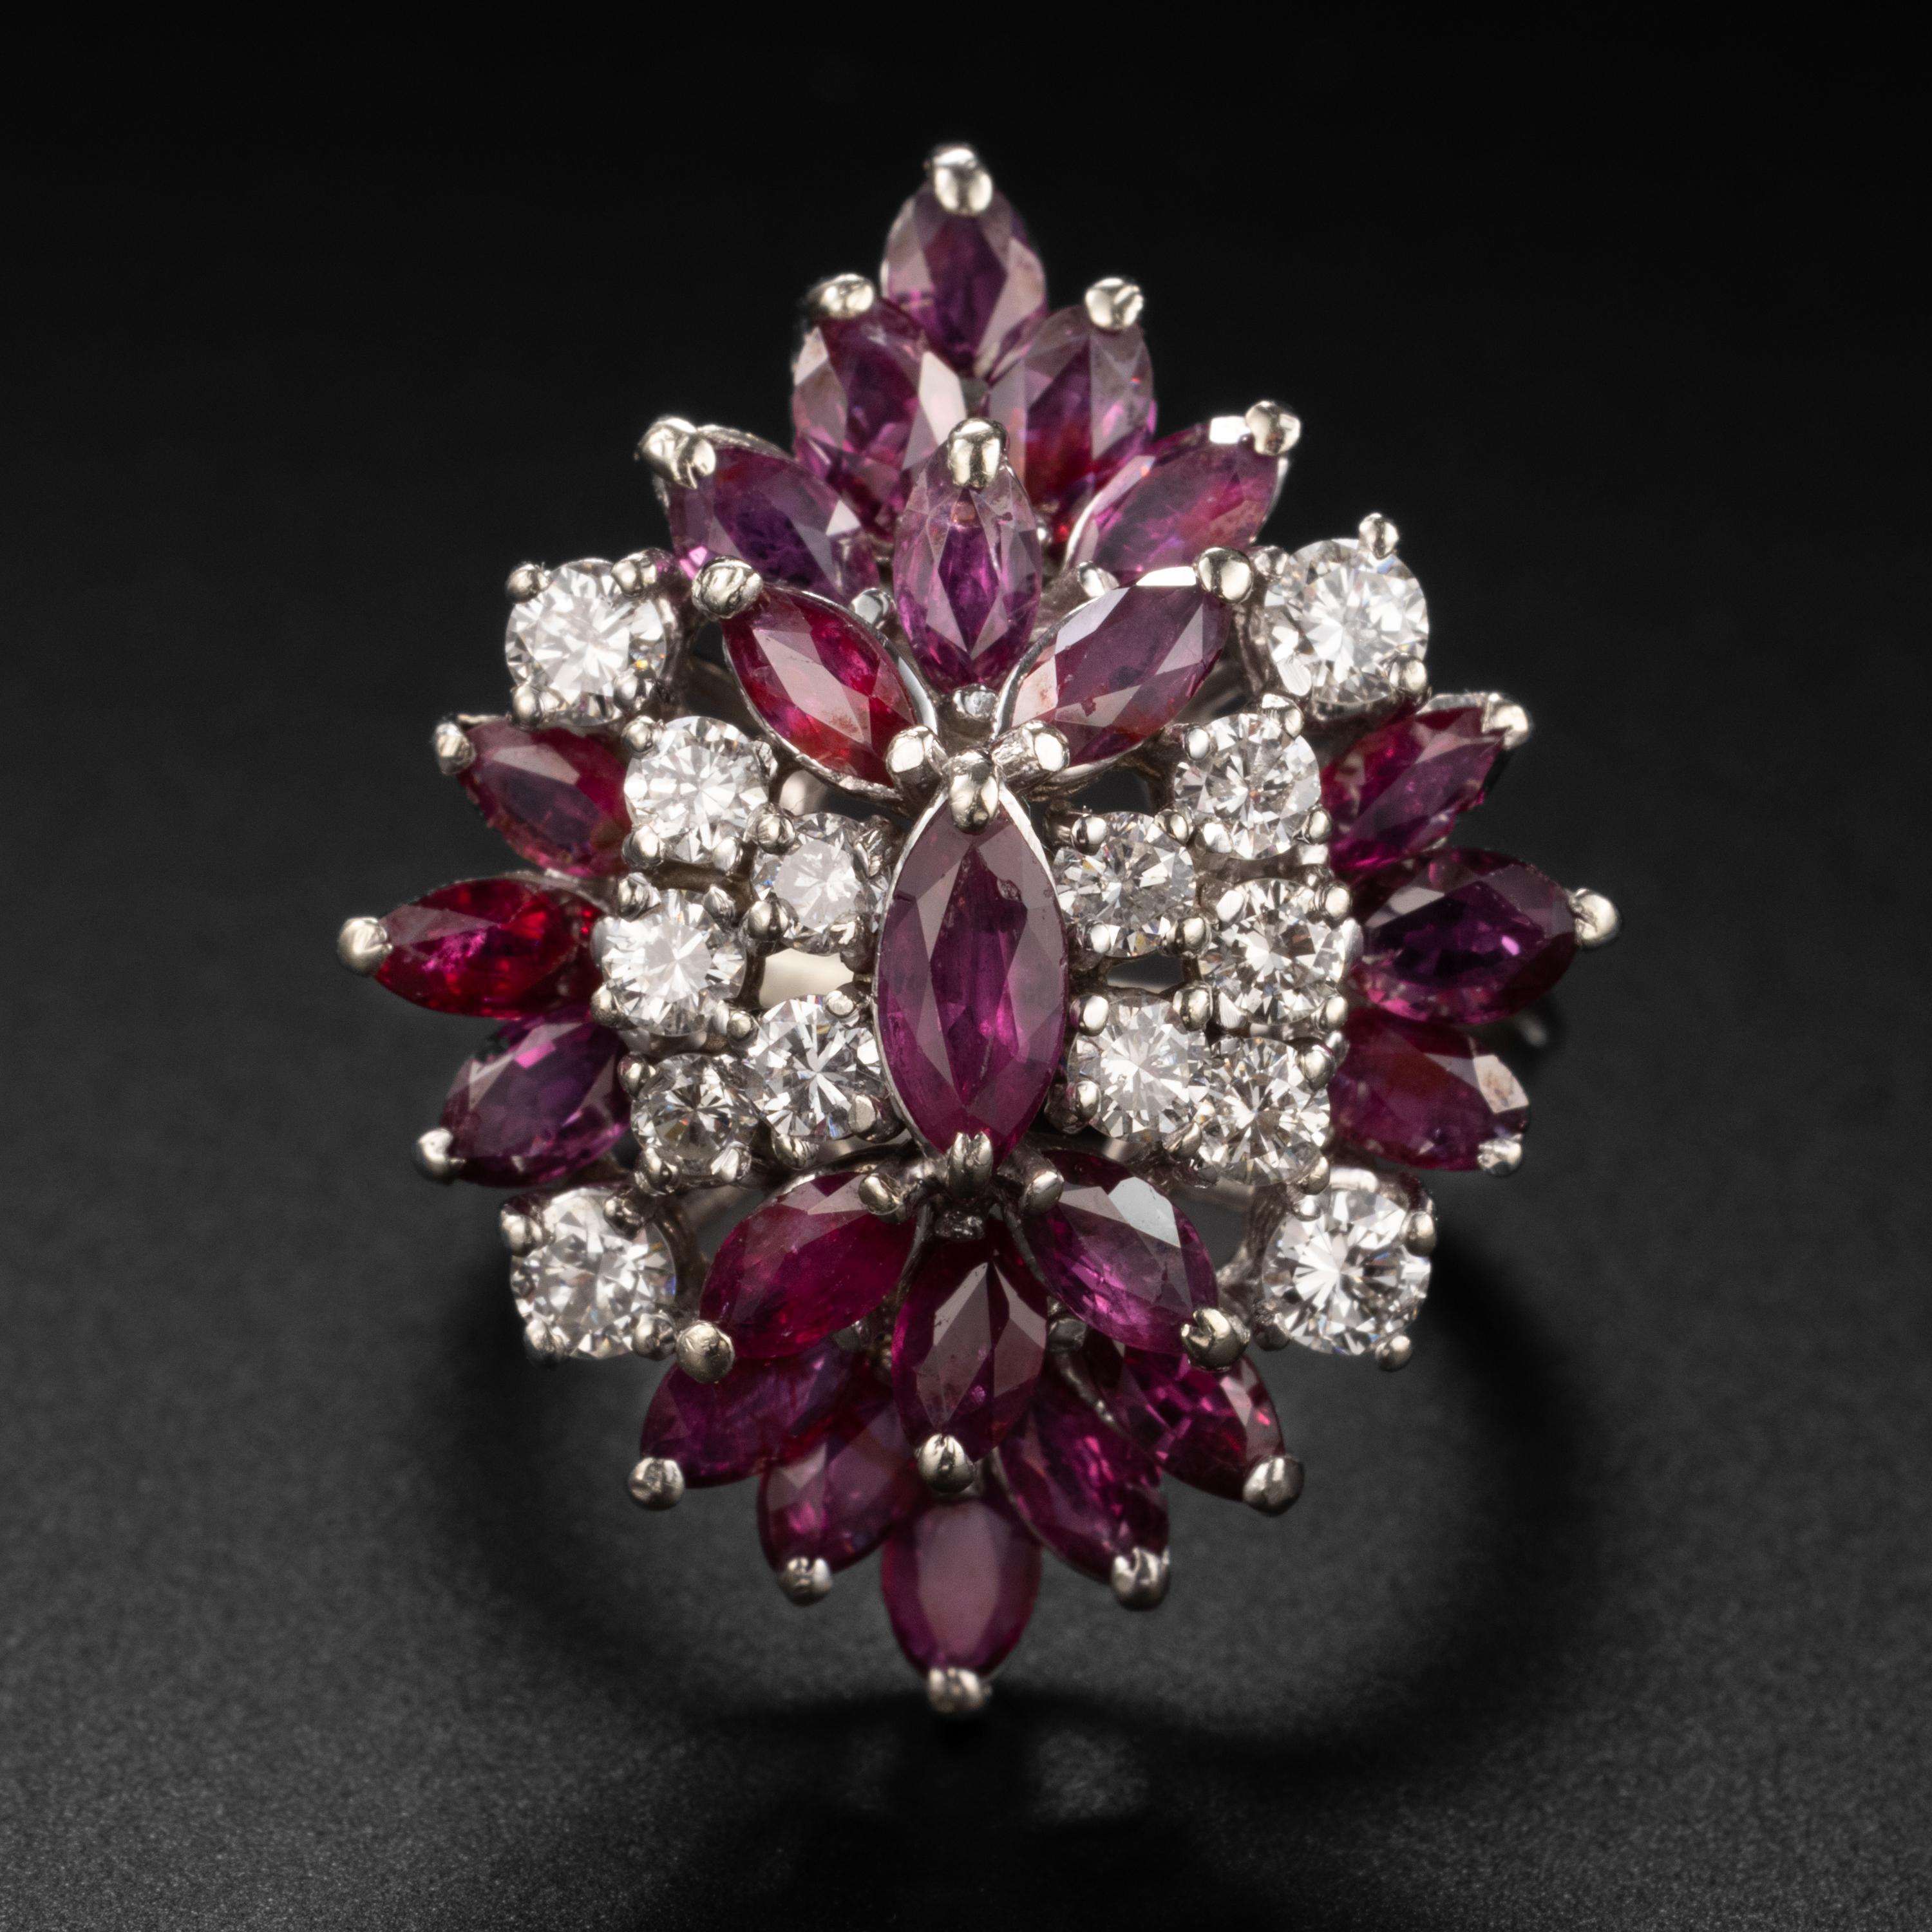 Perfectly, outrageously flashy, and fun, this Midcentury (circa 1950s) cocktail ring is bursting with marquise-cut rubies and round brilliant diamonds. There are 3.30 carats of rubies and 1.08 carats of bright white diamonds for a total carat weight